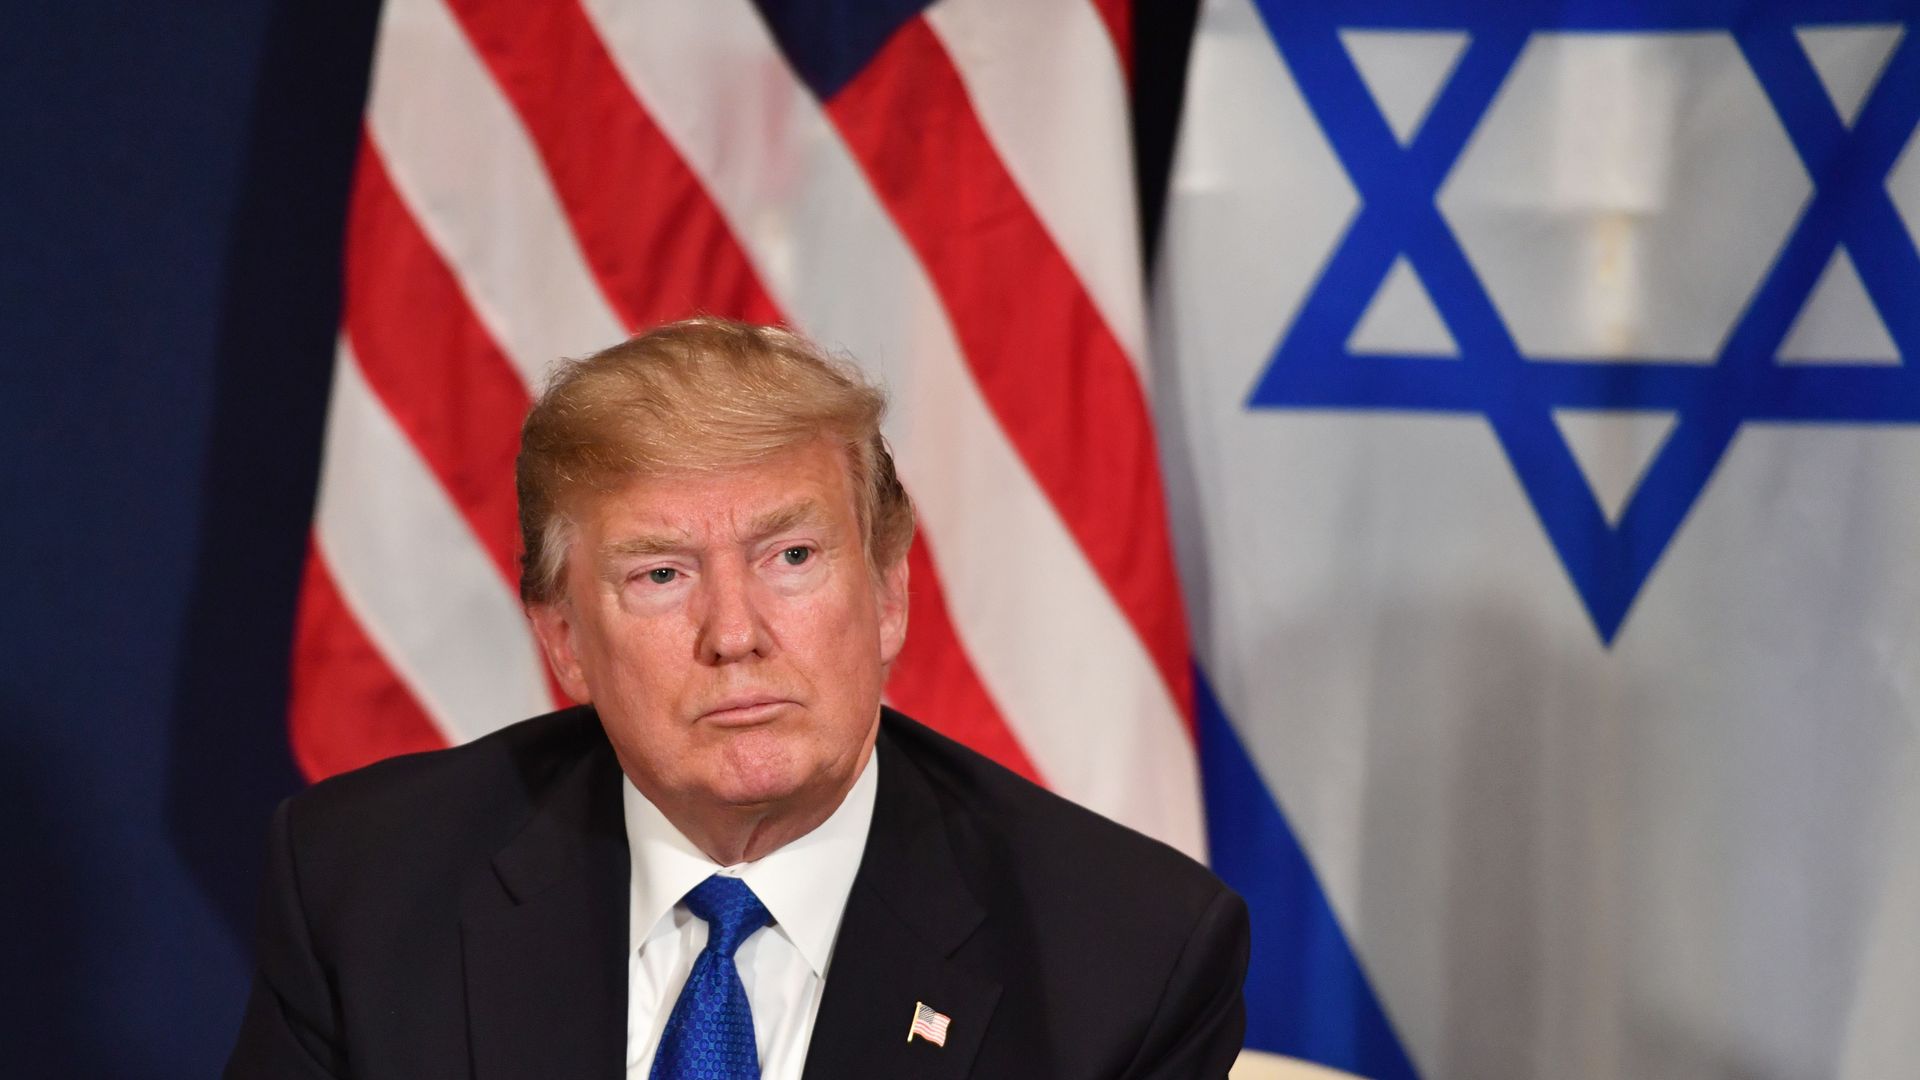 Trump with USA and Israel flags behind him